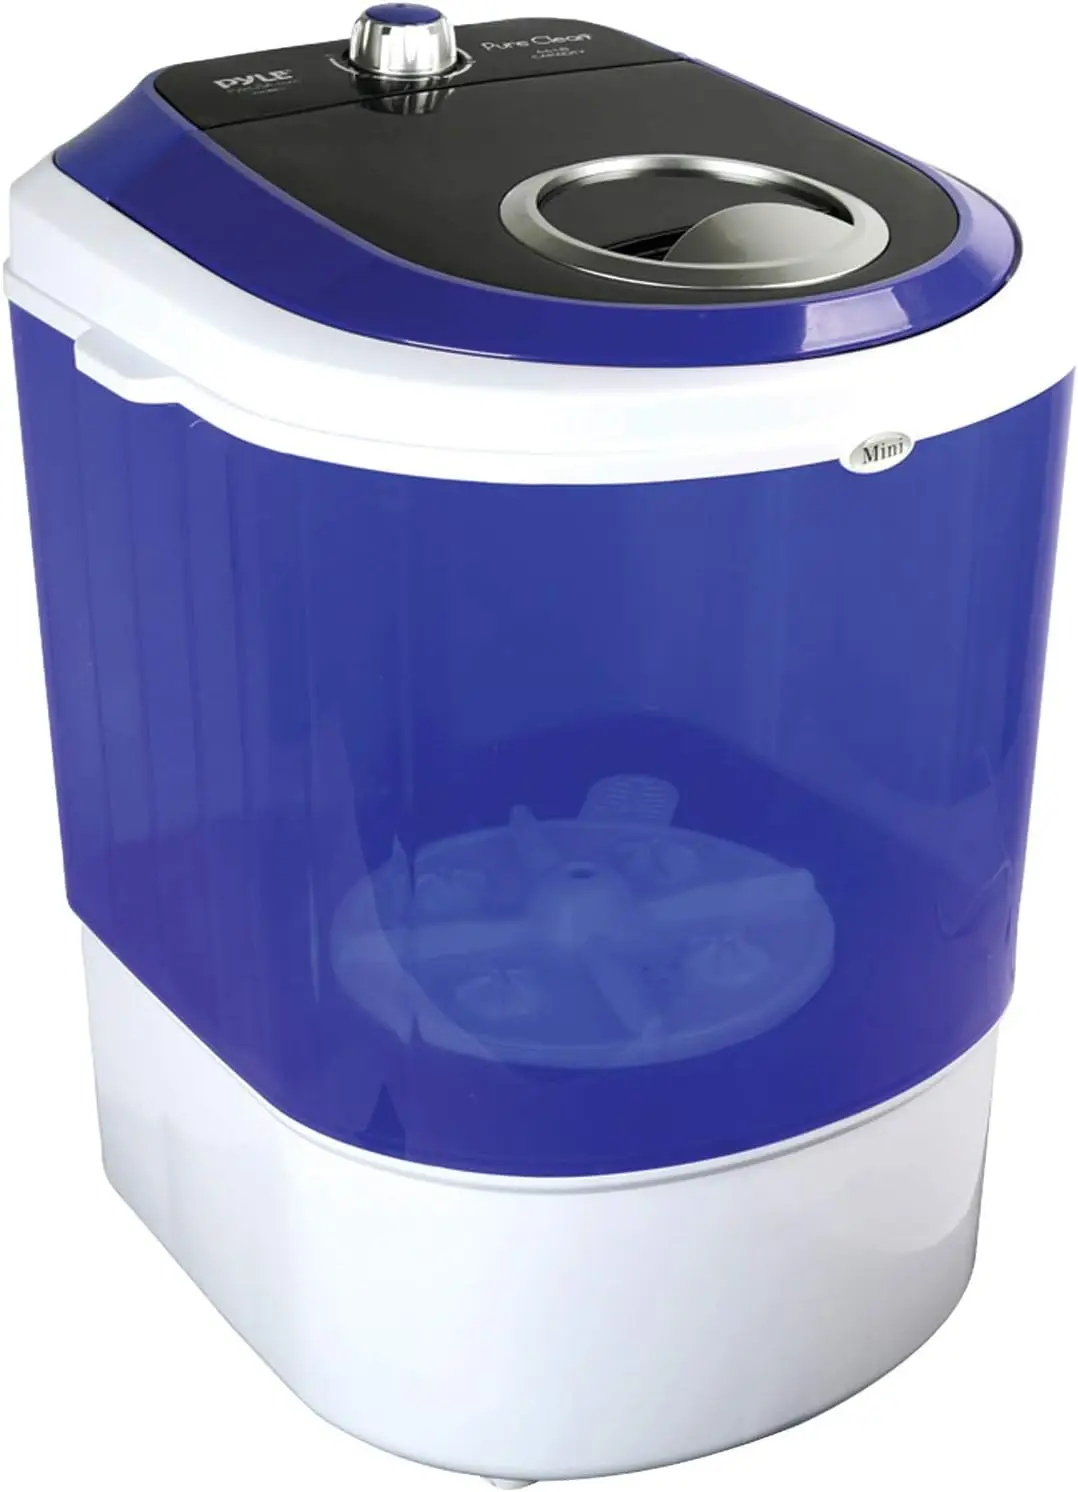 

Version Portable Washer - Top Loader Portable Laundry, Mini Washing Machine, Quiet Washer, Rotary Controller, 110V - For Compact